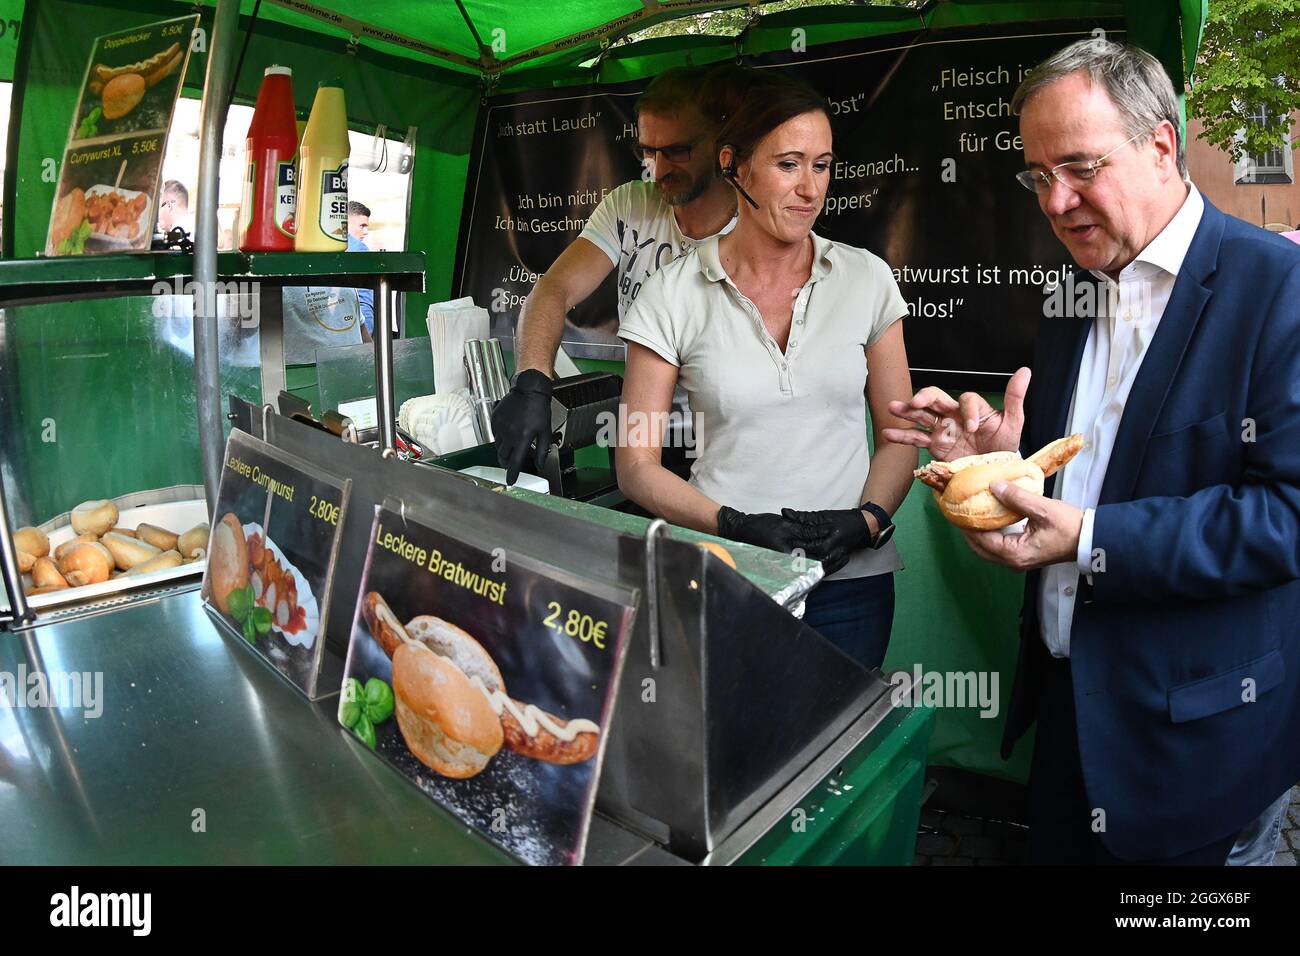 Eisenach, Germany. 03rd Sep, 2021. Armin Laschet (CDU), candidate for chancellor of the CDU/CSU and prime minister of North Rhine-Westphalia, is standing at a bratwurst stand on the sidelines of an election campaign event on the market square with a bratwurst in his hand, talking to saleswoman Yvonne Polivka about Thuringian bratwursts and her work. Credit: Swen Pförtner/dpa-Zentralbild/dpa/Alamy Live News Stock Photo